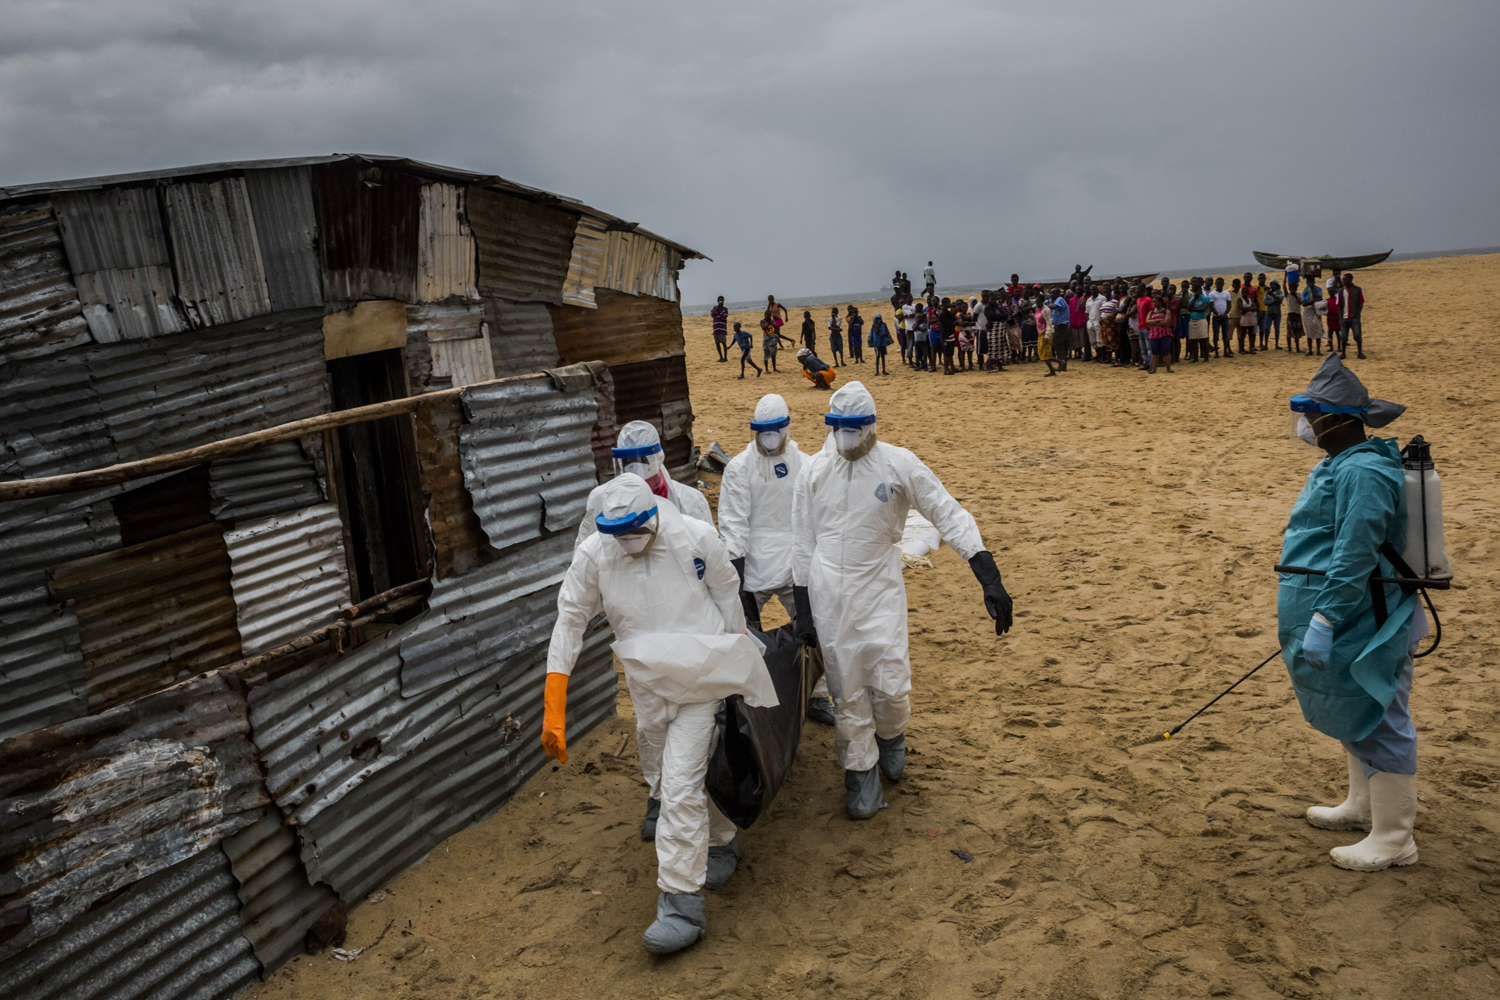 Liberian Red Cross burial team carry a body of a suspected Ebola victim from the West Point neighborhood in Monrovia, Liberia, Sept. 17, 2014. (Daniel Berehulak/The New York Times/Redux)